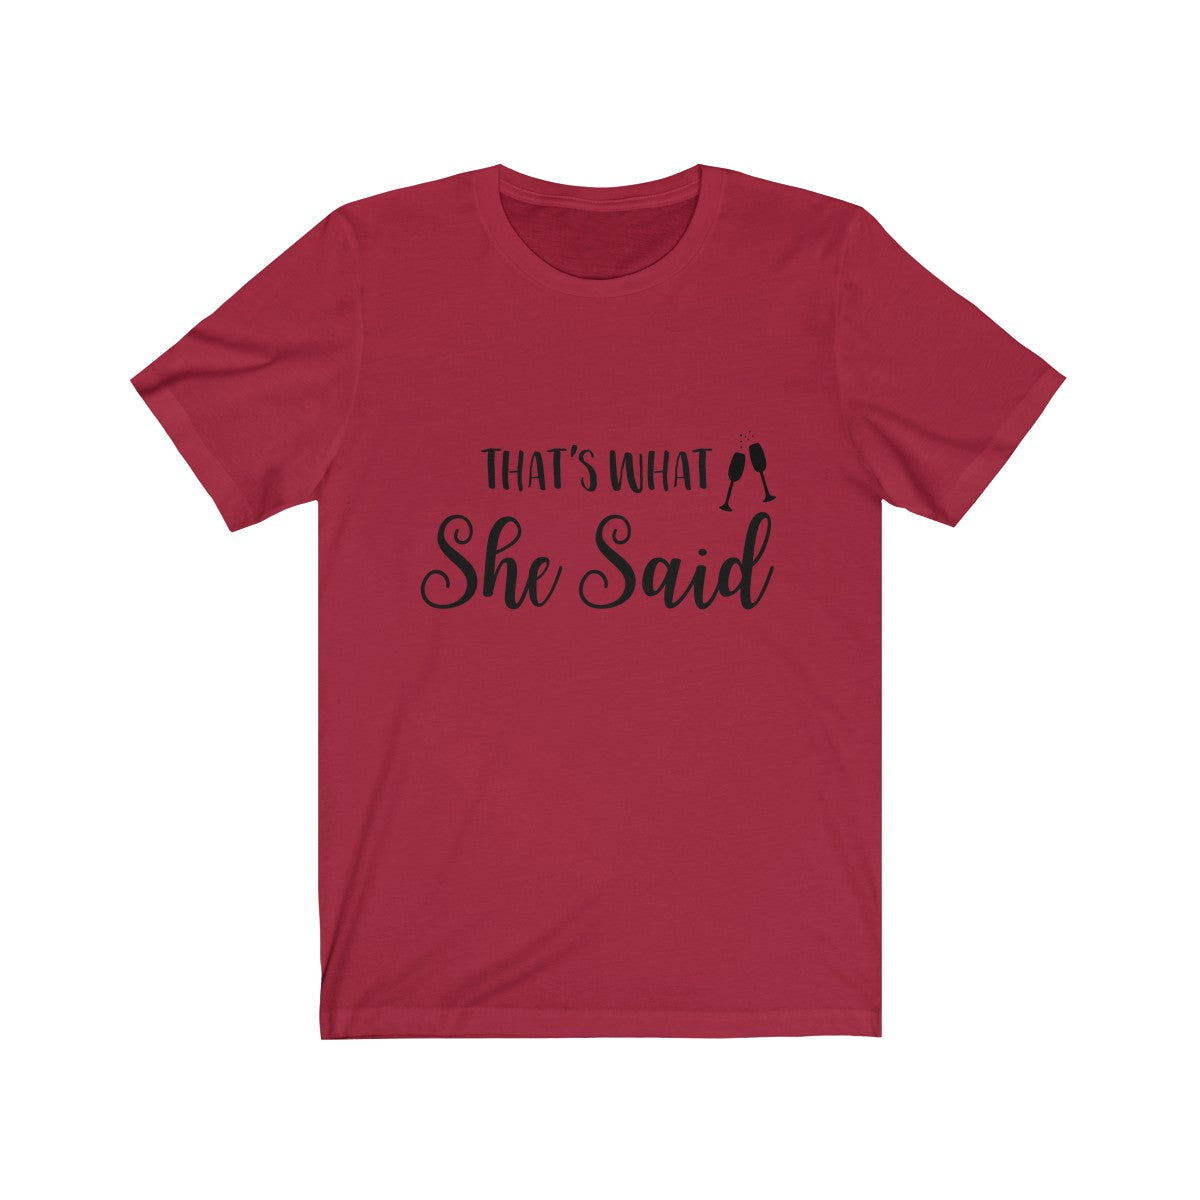 Tee thats what she said black lettering - elrileygifts